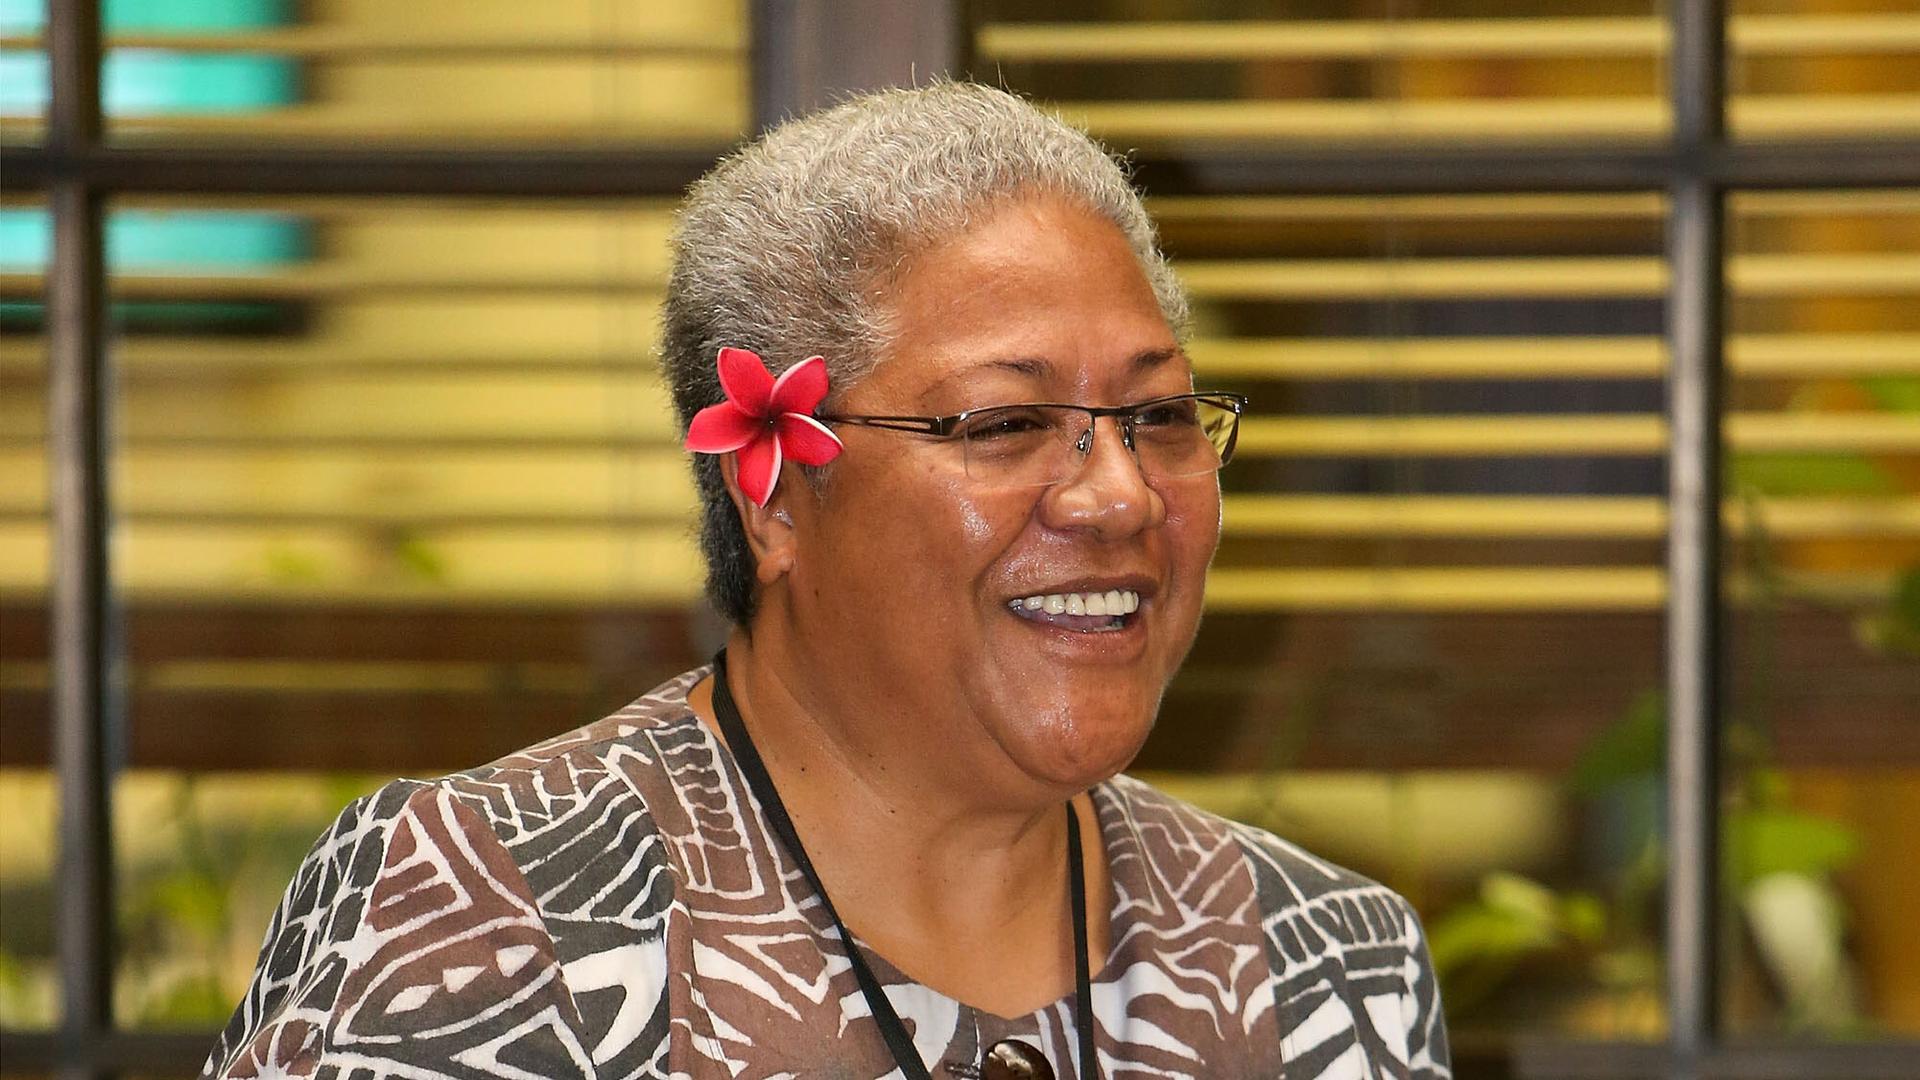 Samoa MP Fiamē Naomi Mata'afa smiles with a red flower in her hair